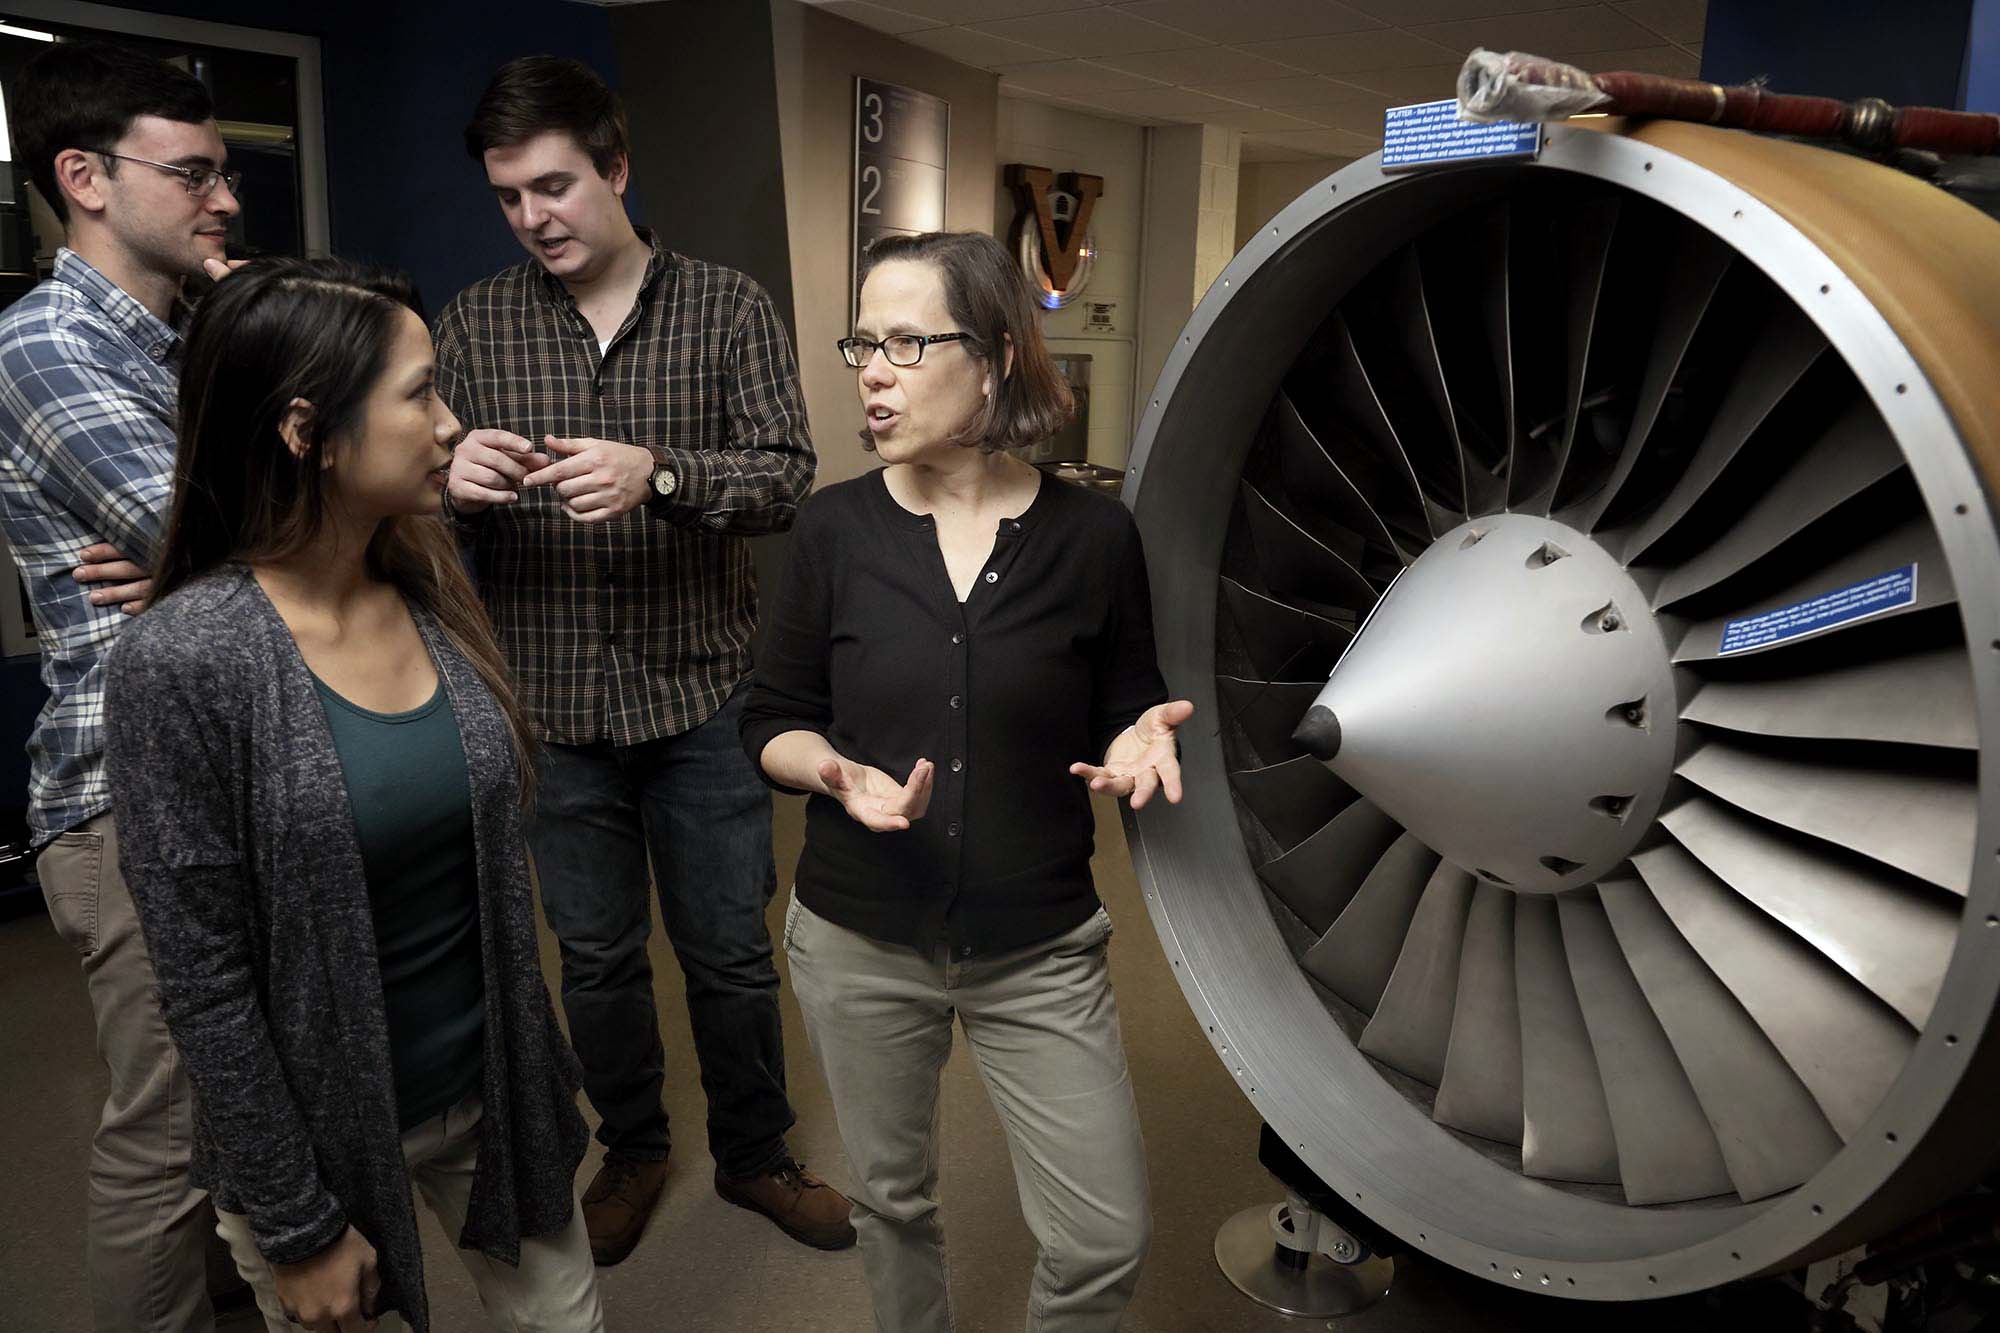 Elizabeth Opila speaking to students  in front of an airplane Engine